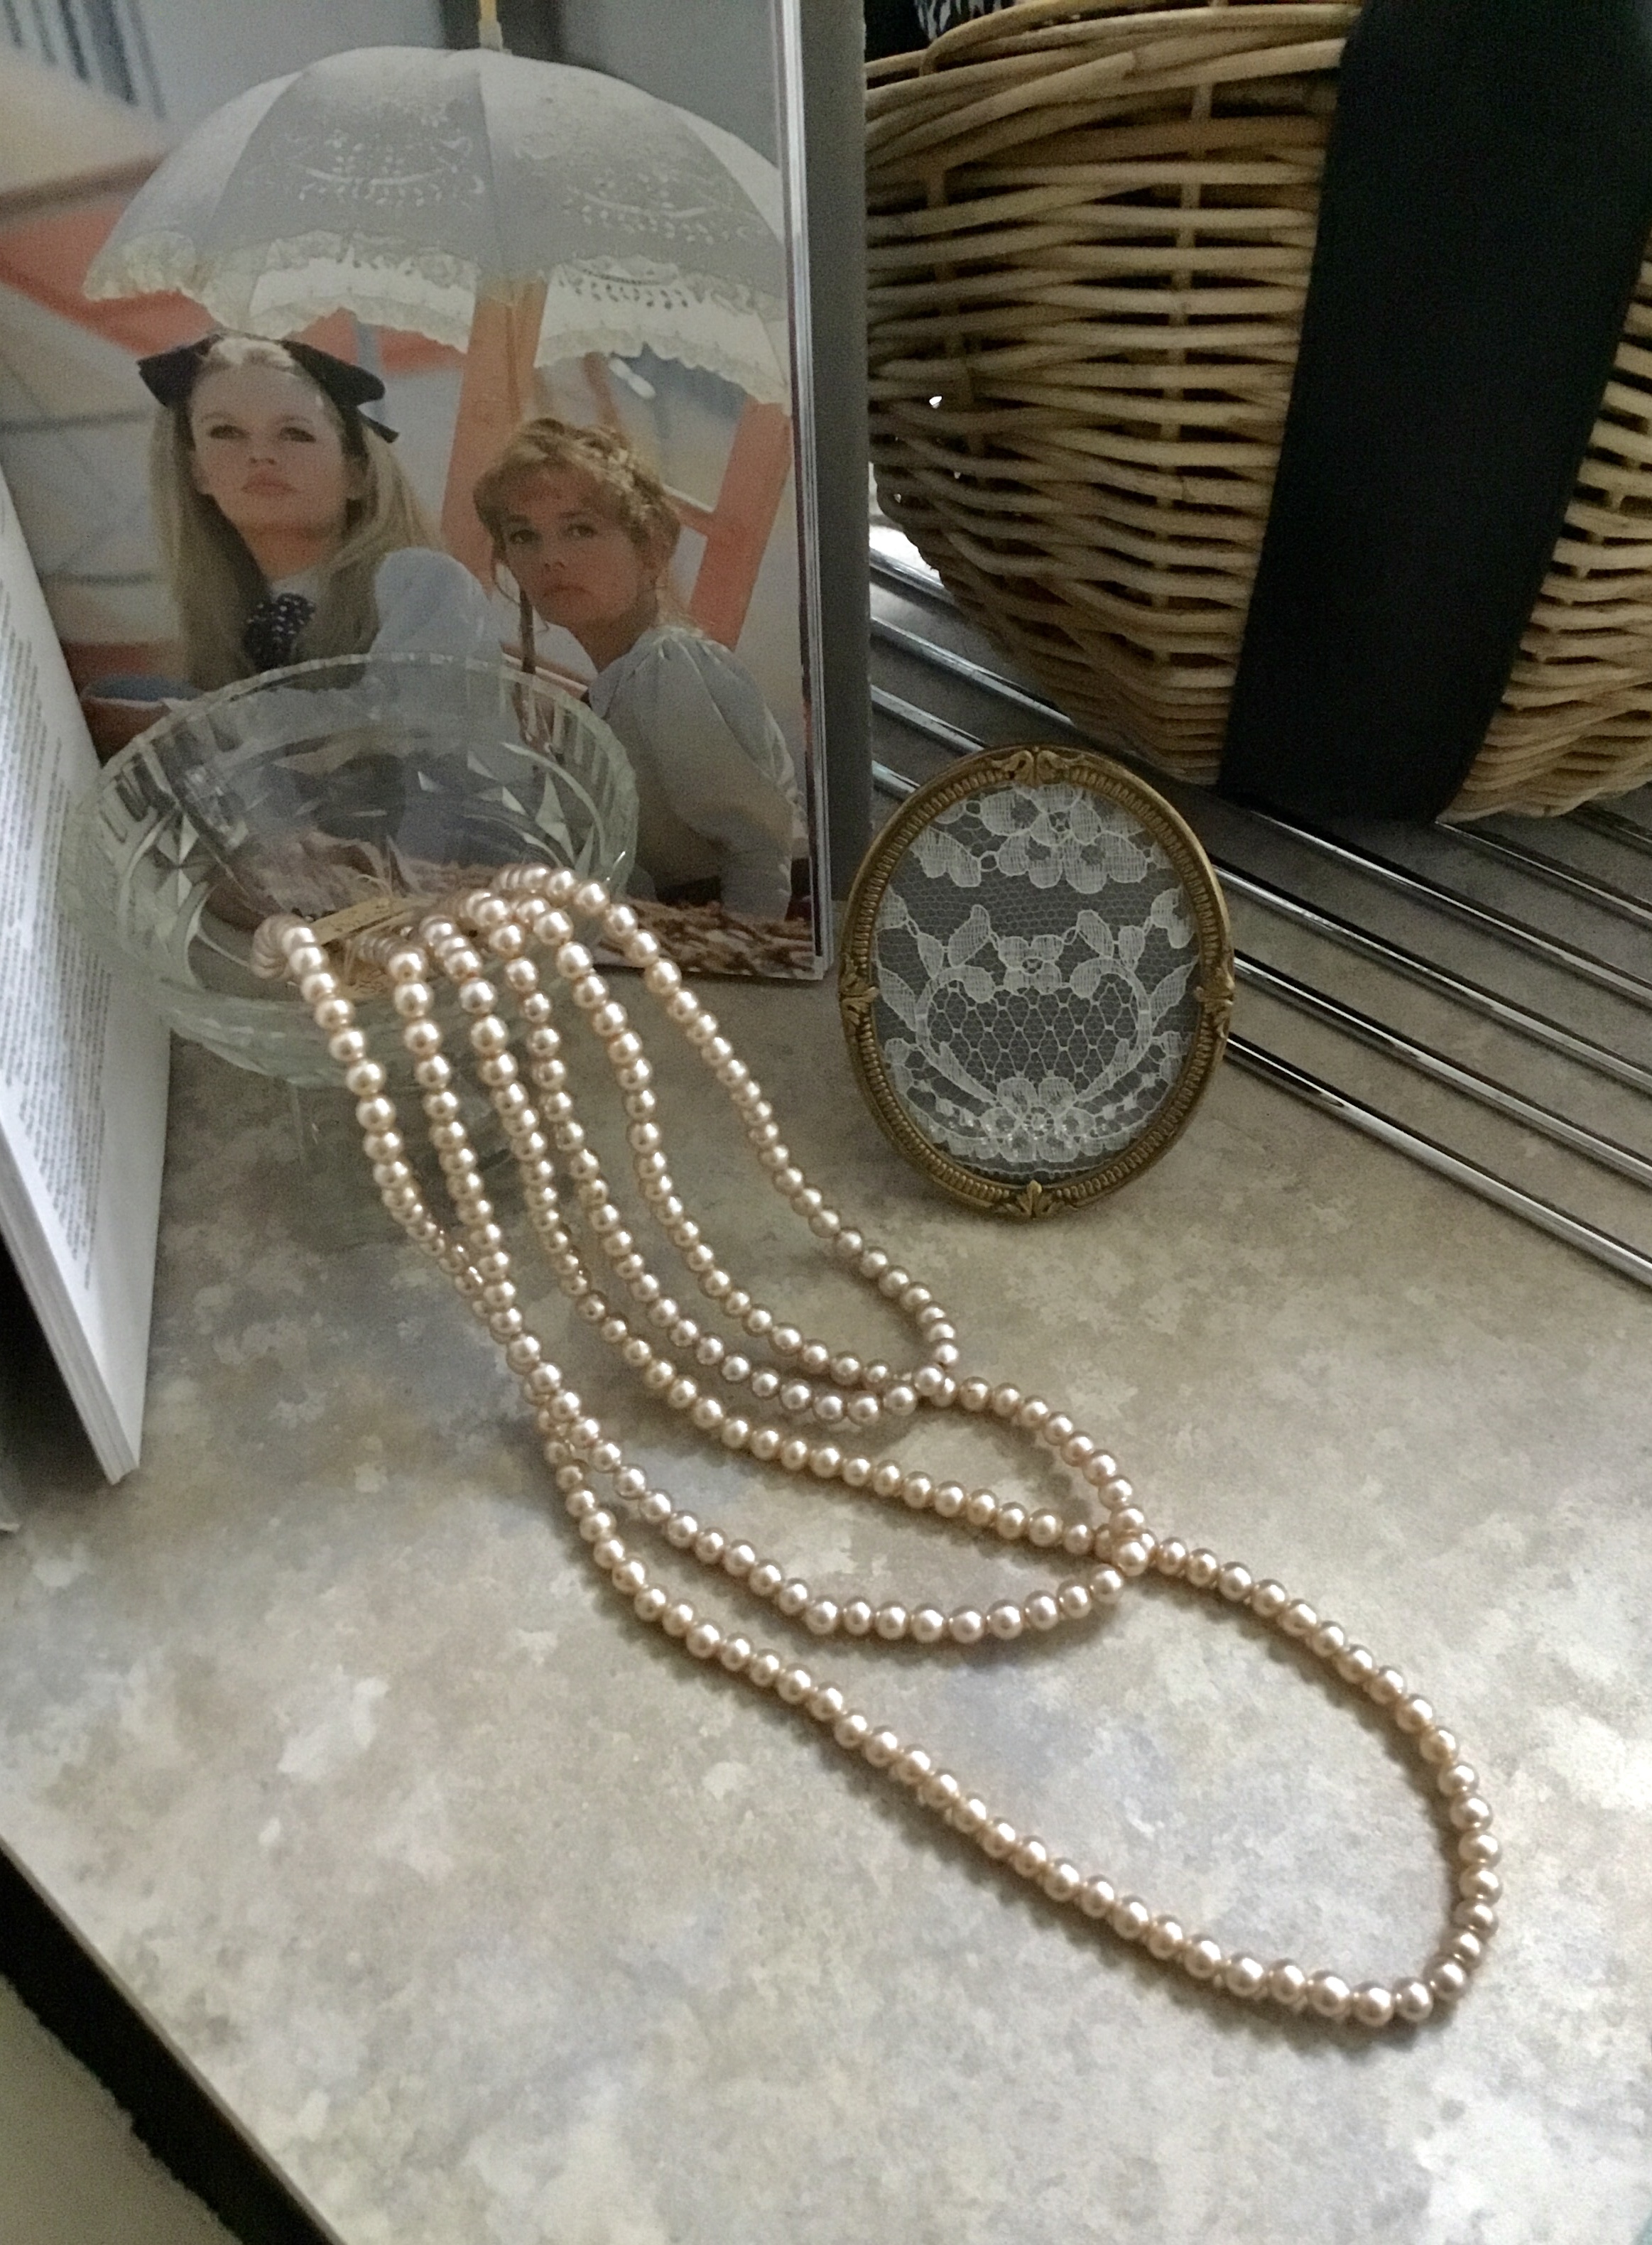 BUY NOW Dazzling 00417  閉店SALE 30％off

Vintage Glass Pearl Necklace
ヴィンテージ ガラスパールネックレス